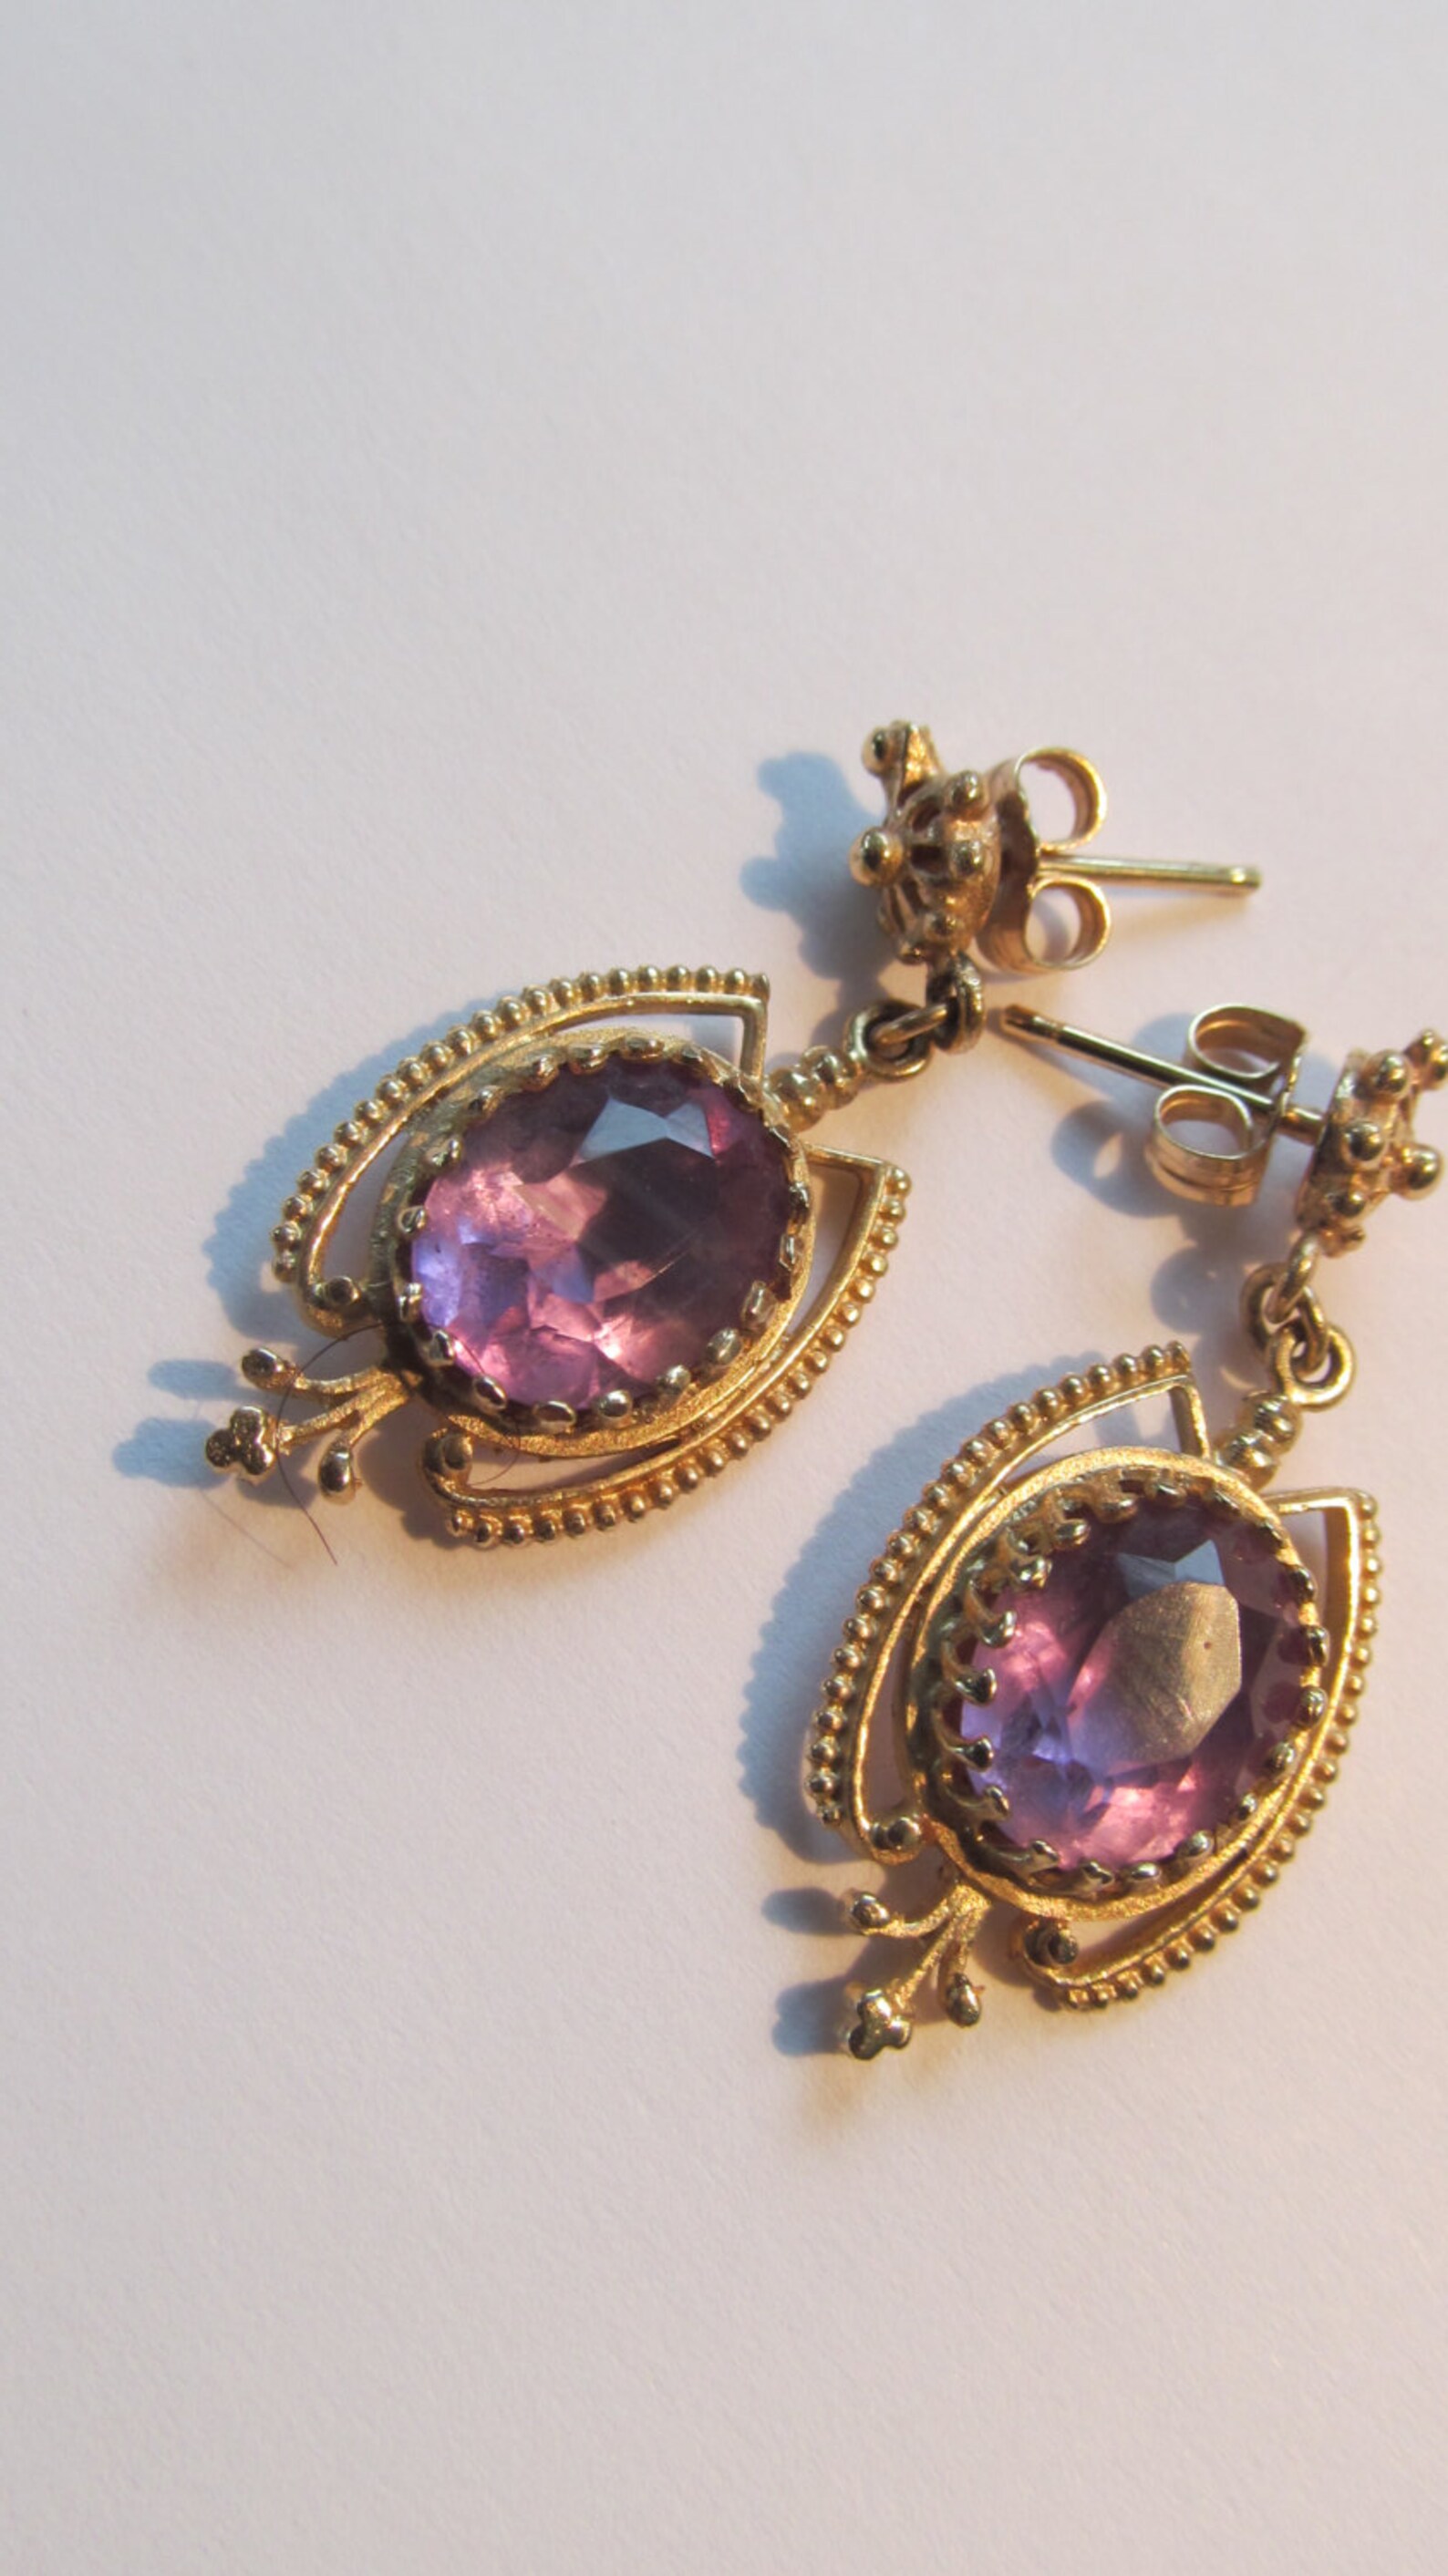 14k Gold Georgian Victorian Revival Faceted African Amethyst - Etsy